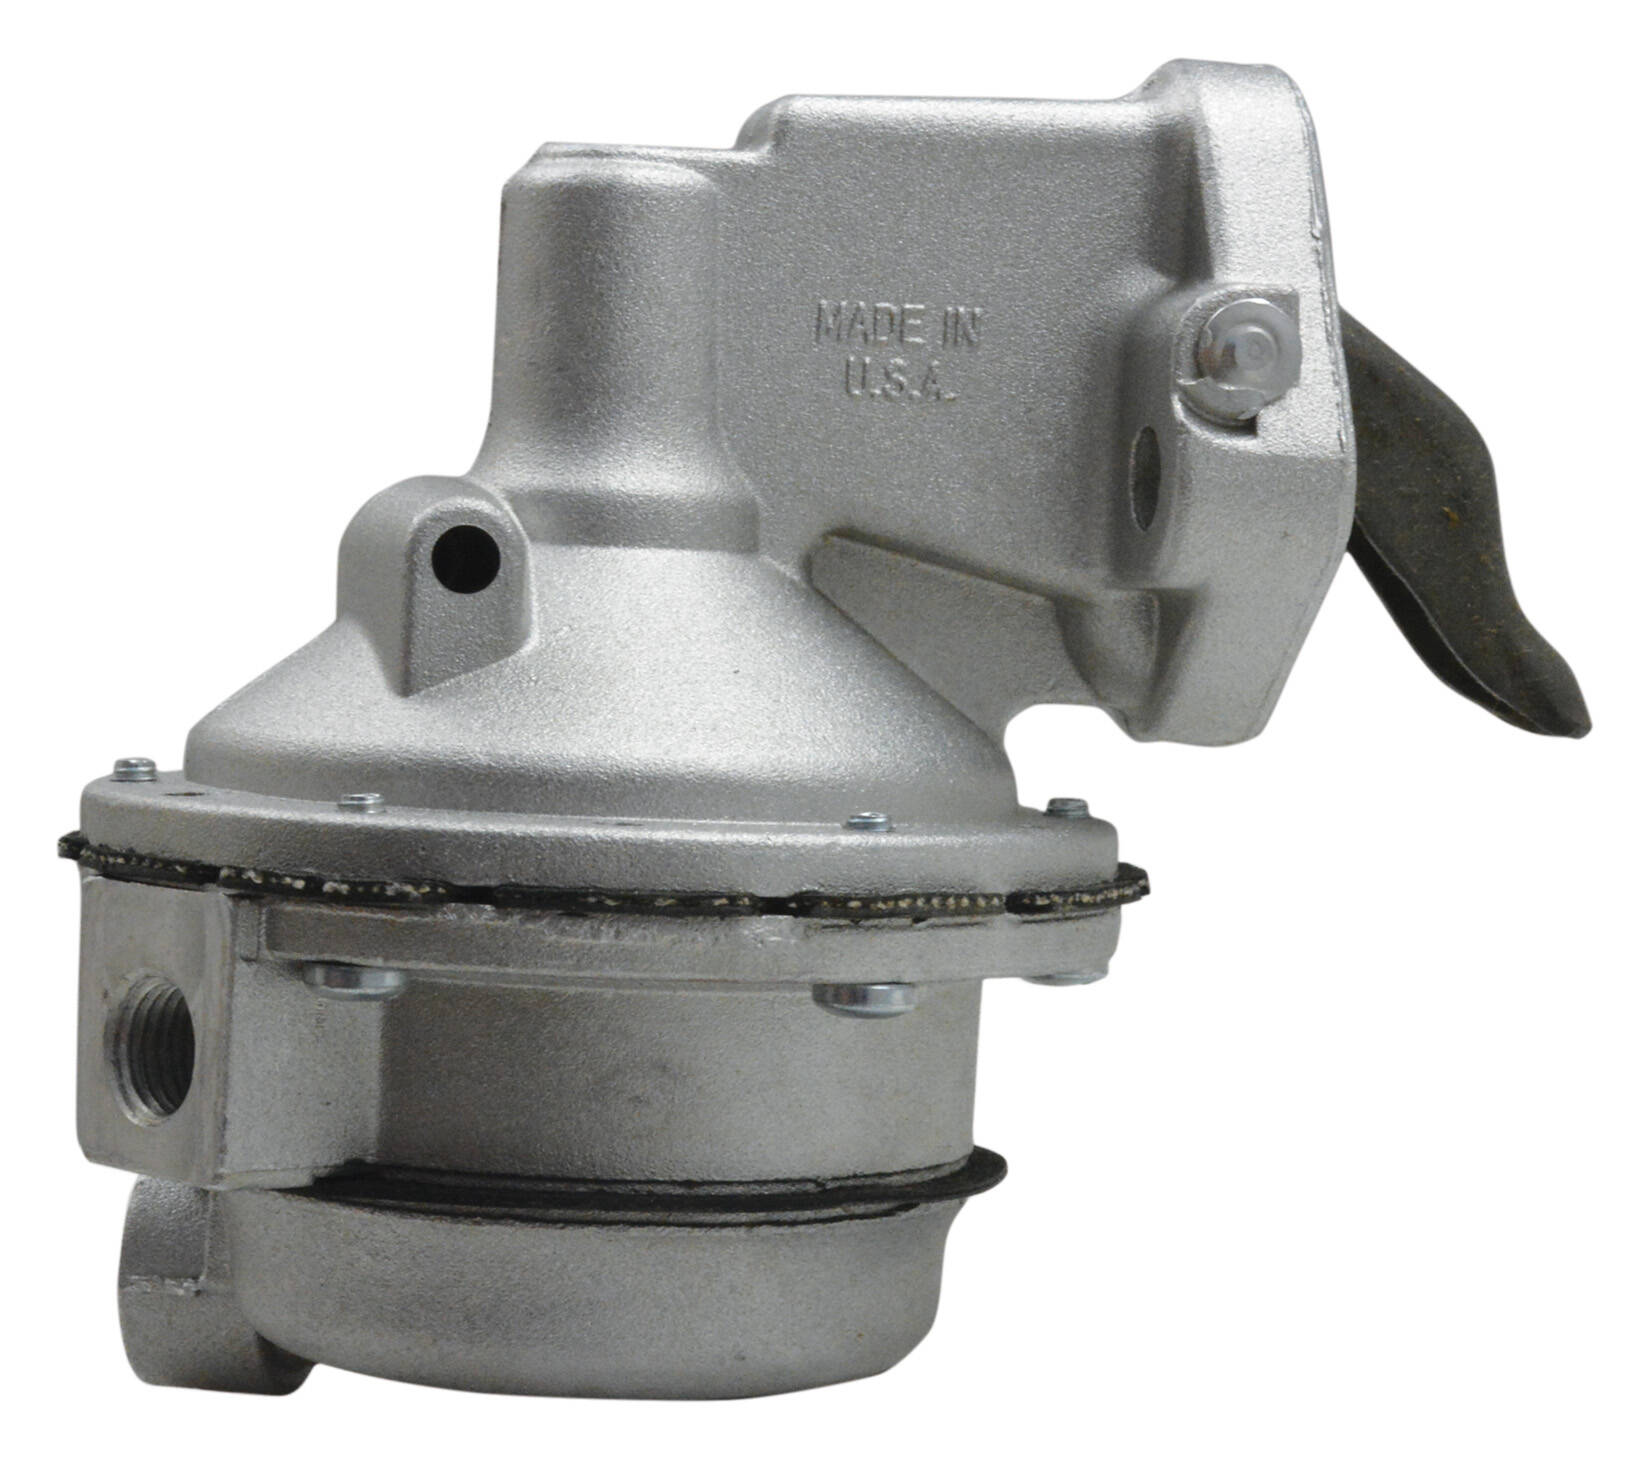 Carter Fuel Systems and Water Pumps - Engineered in the USA